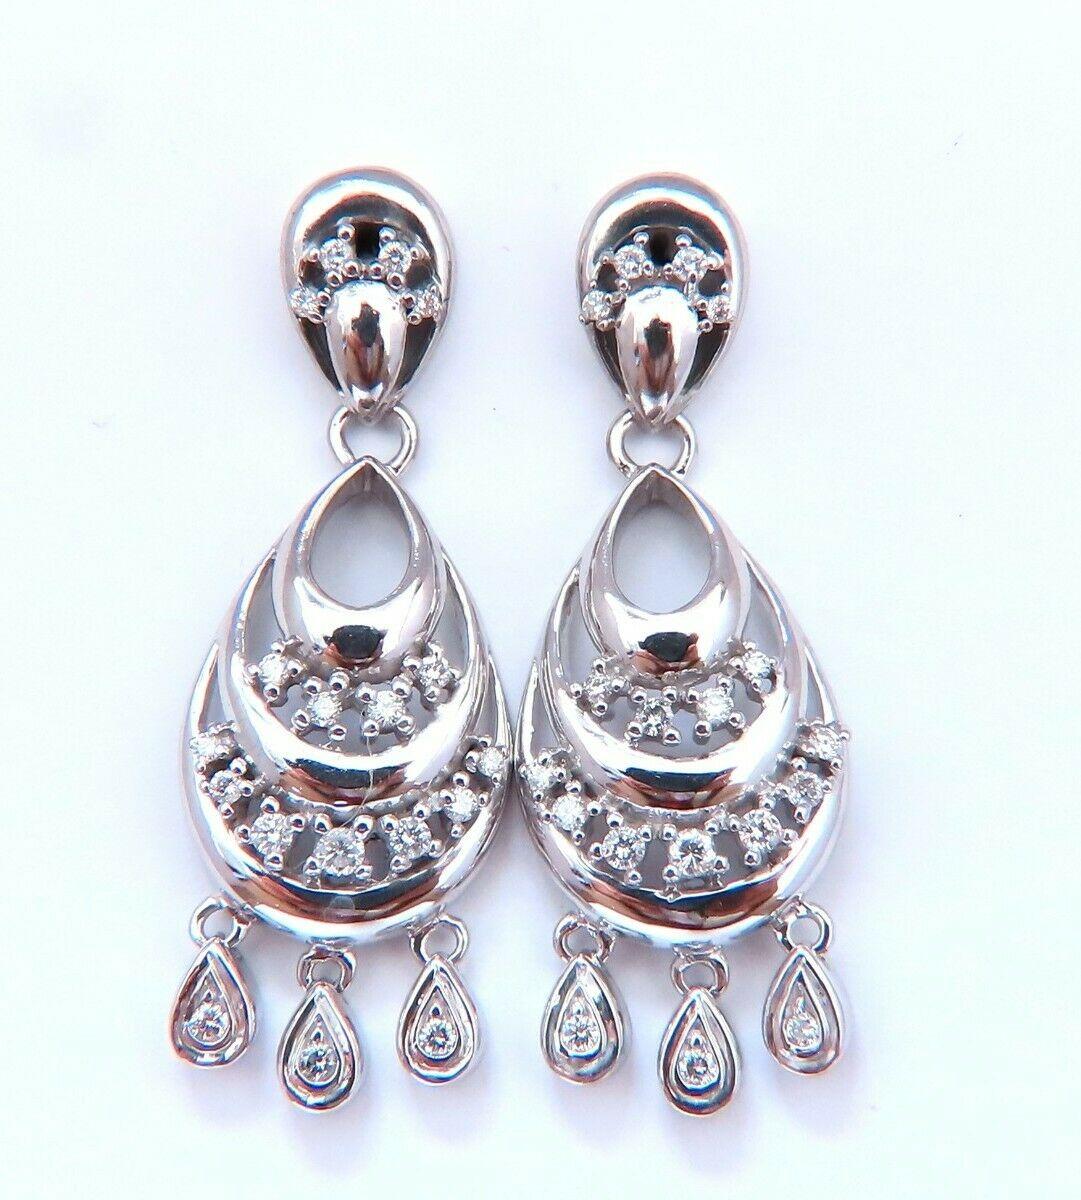 Semi crescent dangle loop earrings.

.60cts of natural round diamonds:

H-color, Vs-2 clarity.

14kt. white gold 10 grams.

Earrings measure: 1 inch long

.55 inch wide

Comfortable butterfly closure

$4000 Appraisal Certificate to accompany

Free